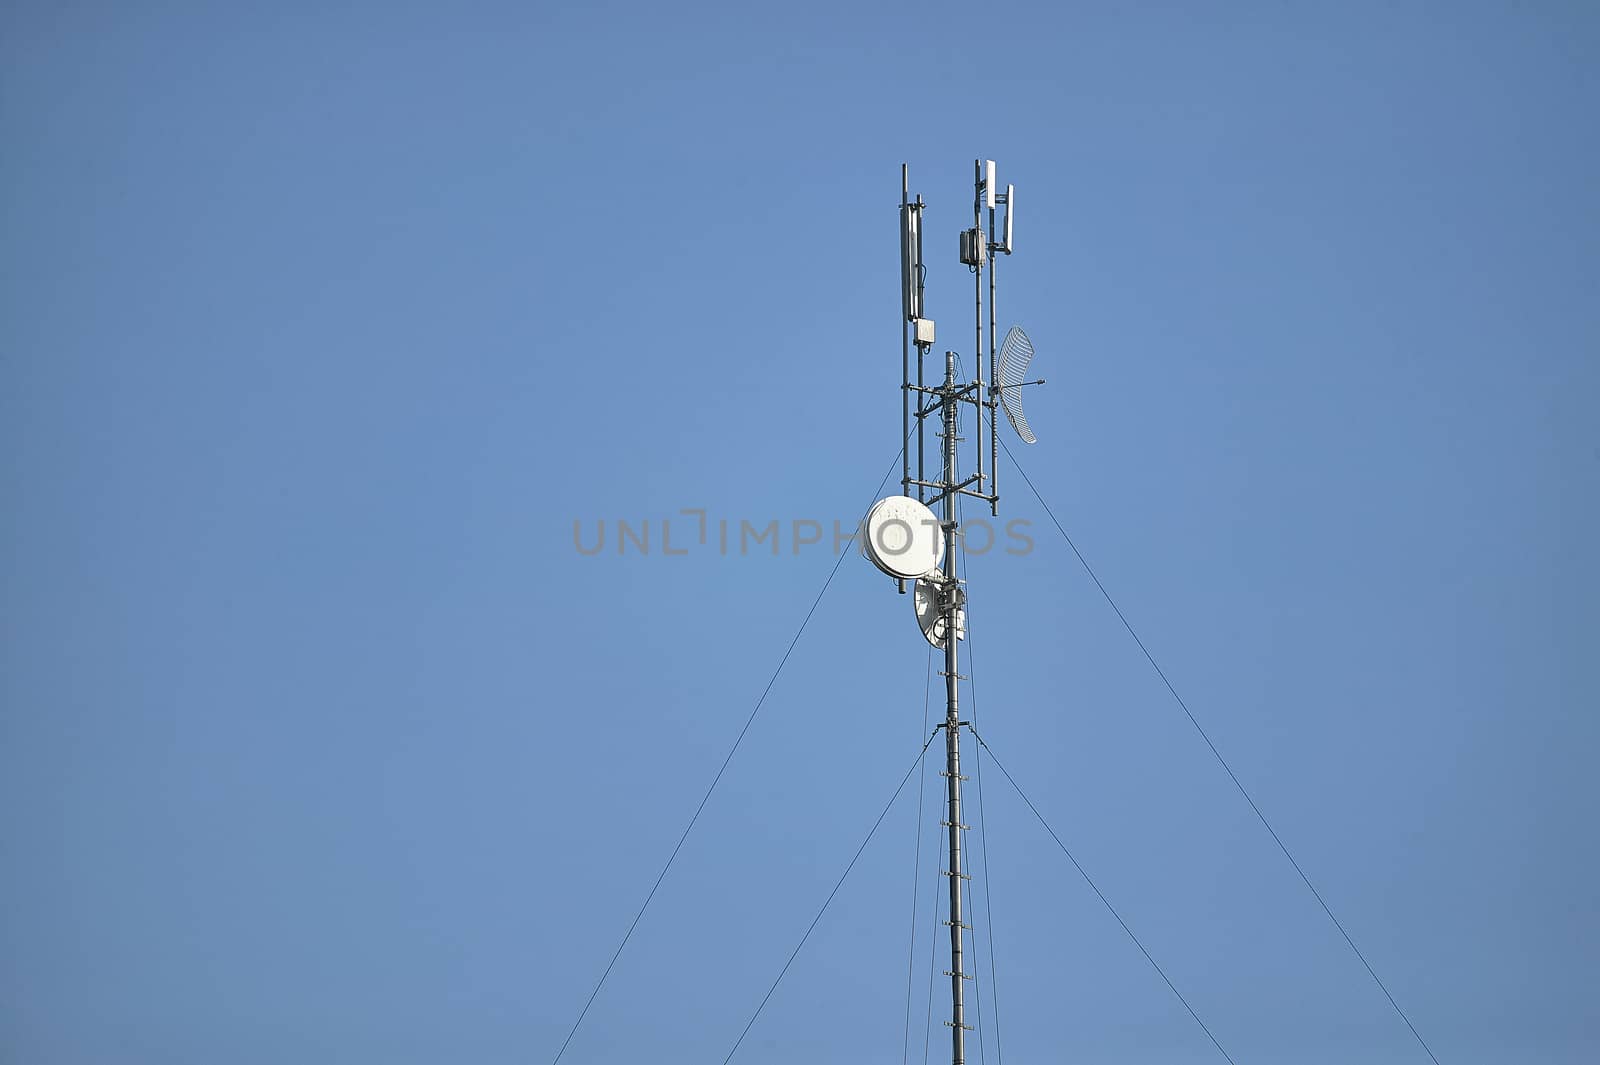 Antenna for internet data transmission. by pippocarlot